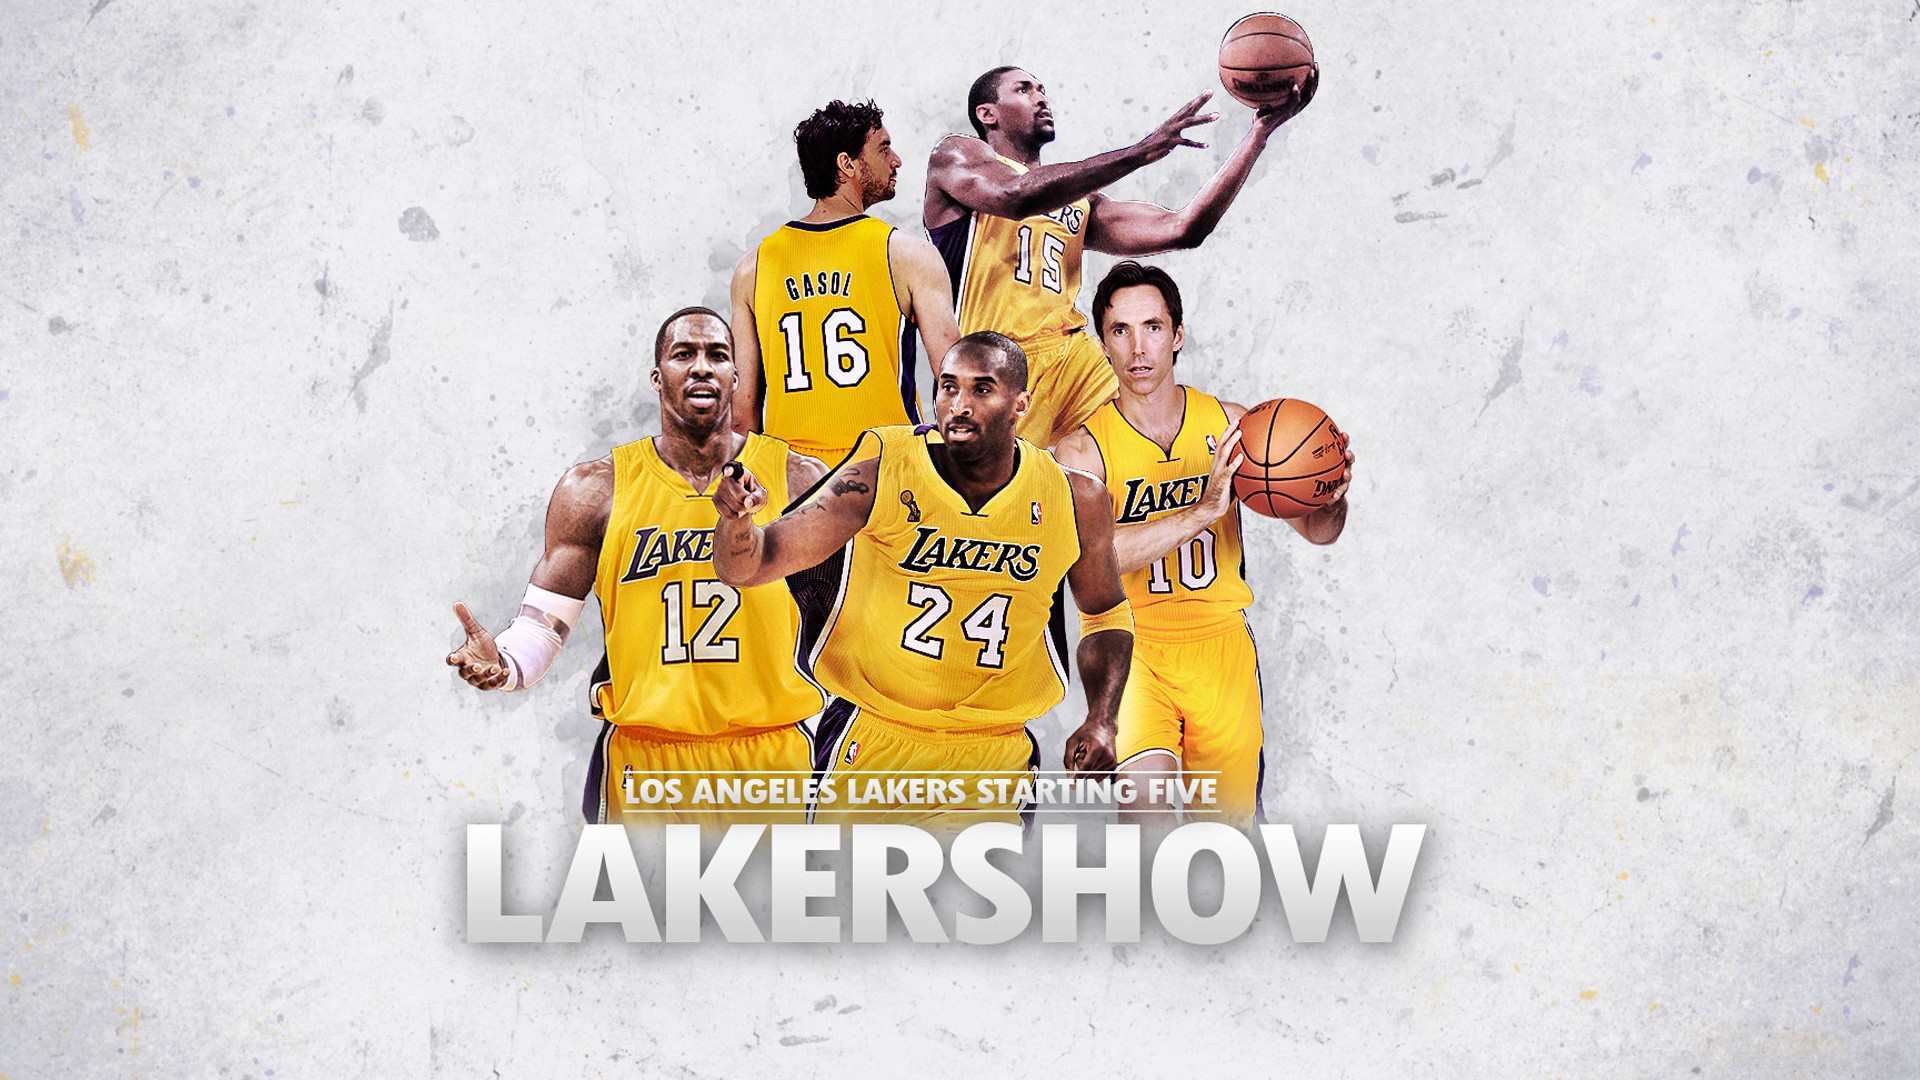 LA Lakers Desktop Wallpaper with image dimensions 1920x1080 pixel. You can make this wallpaper for your Desktop Computer Backgrounds, Windows or Mac Screensavers, iPhone Lock screen, Tablet or Android and another Mobile Phone device